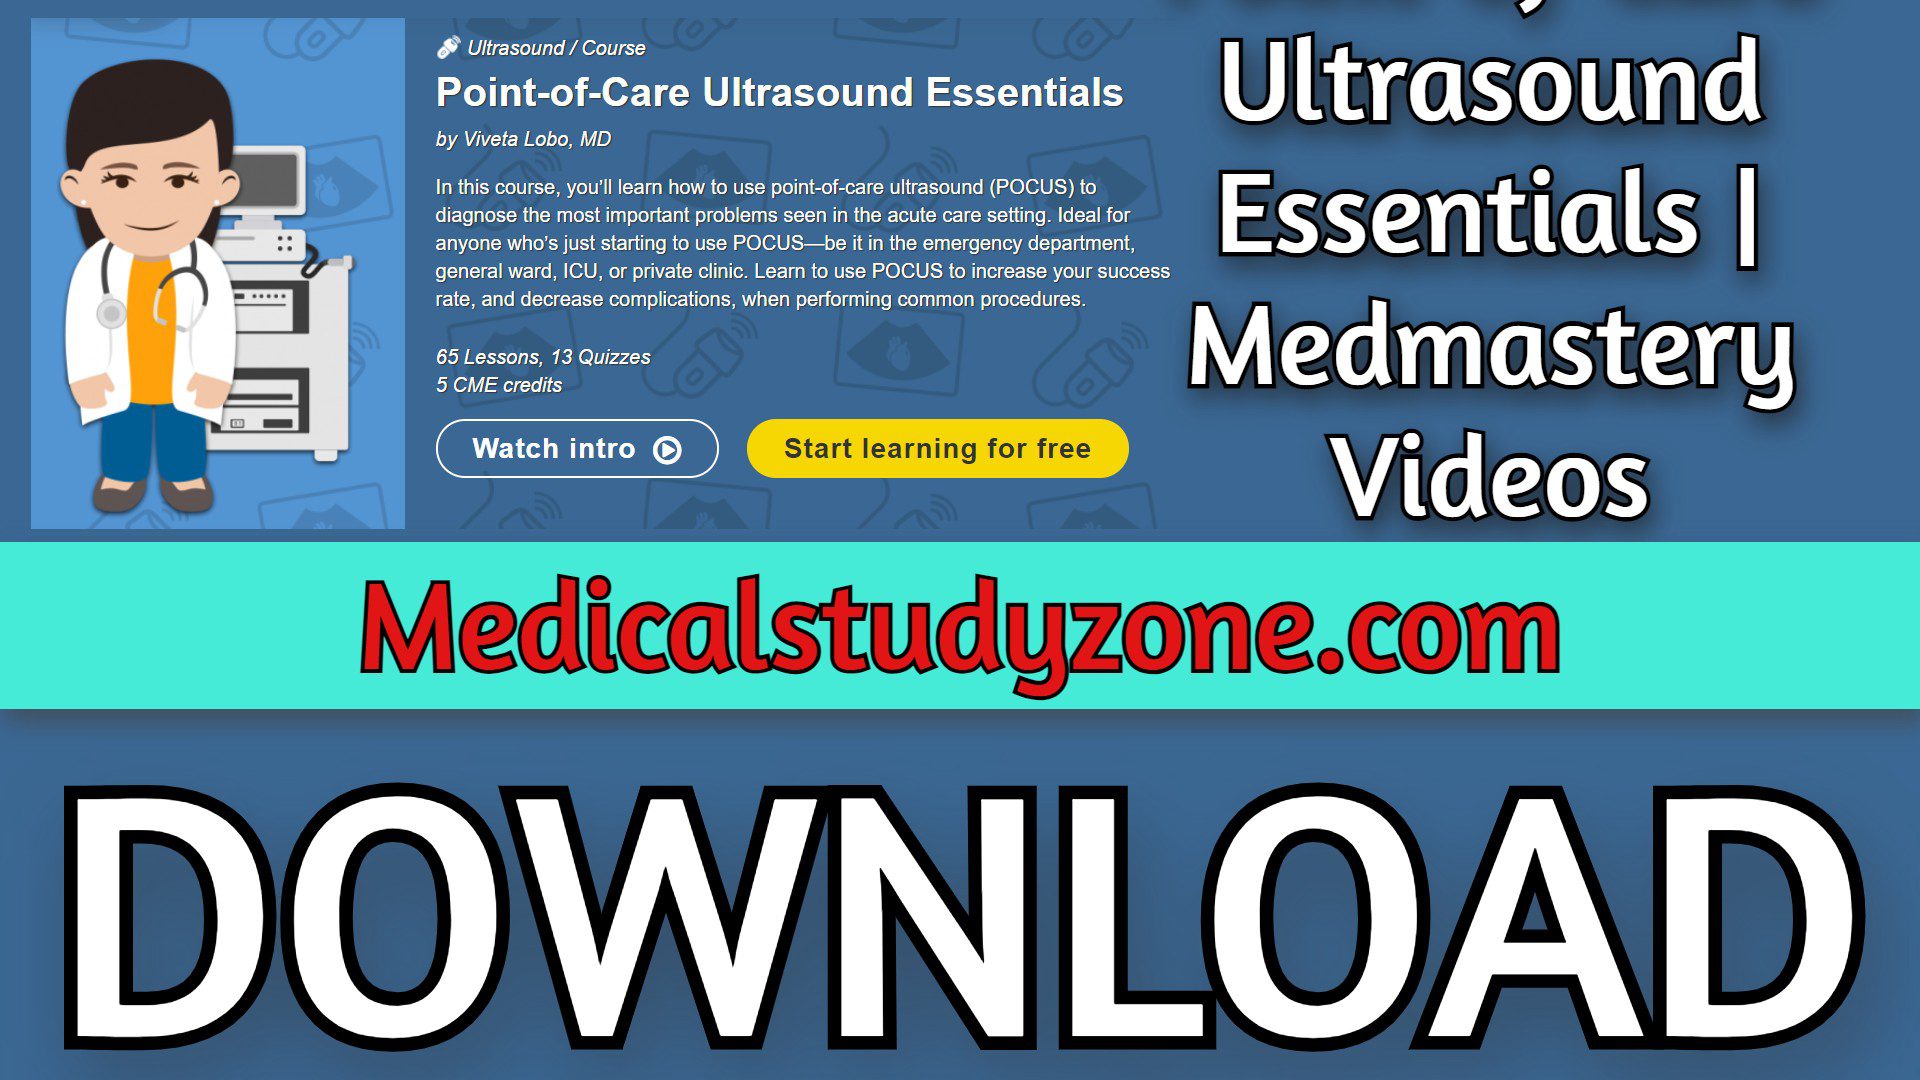 Point-of-Care Ultrasound Essentials | Medmastery 2023 Videos Free Download